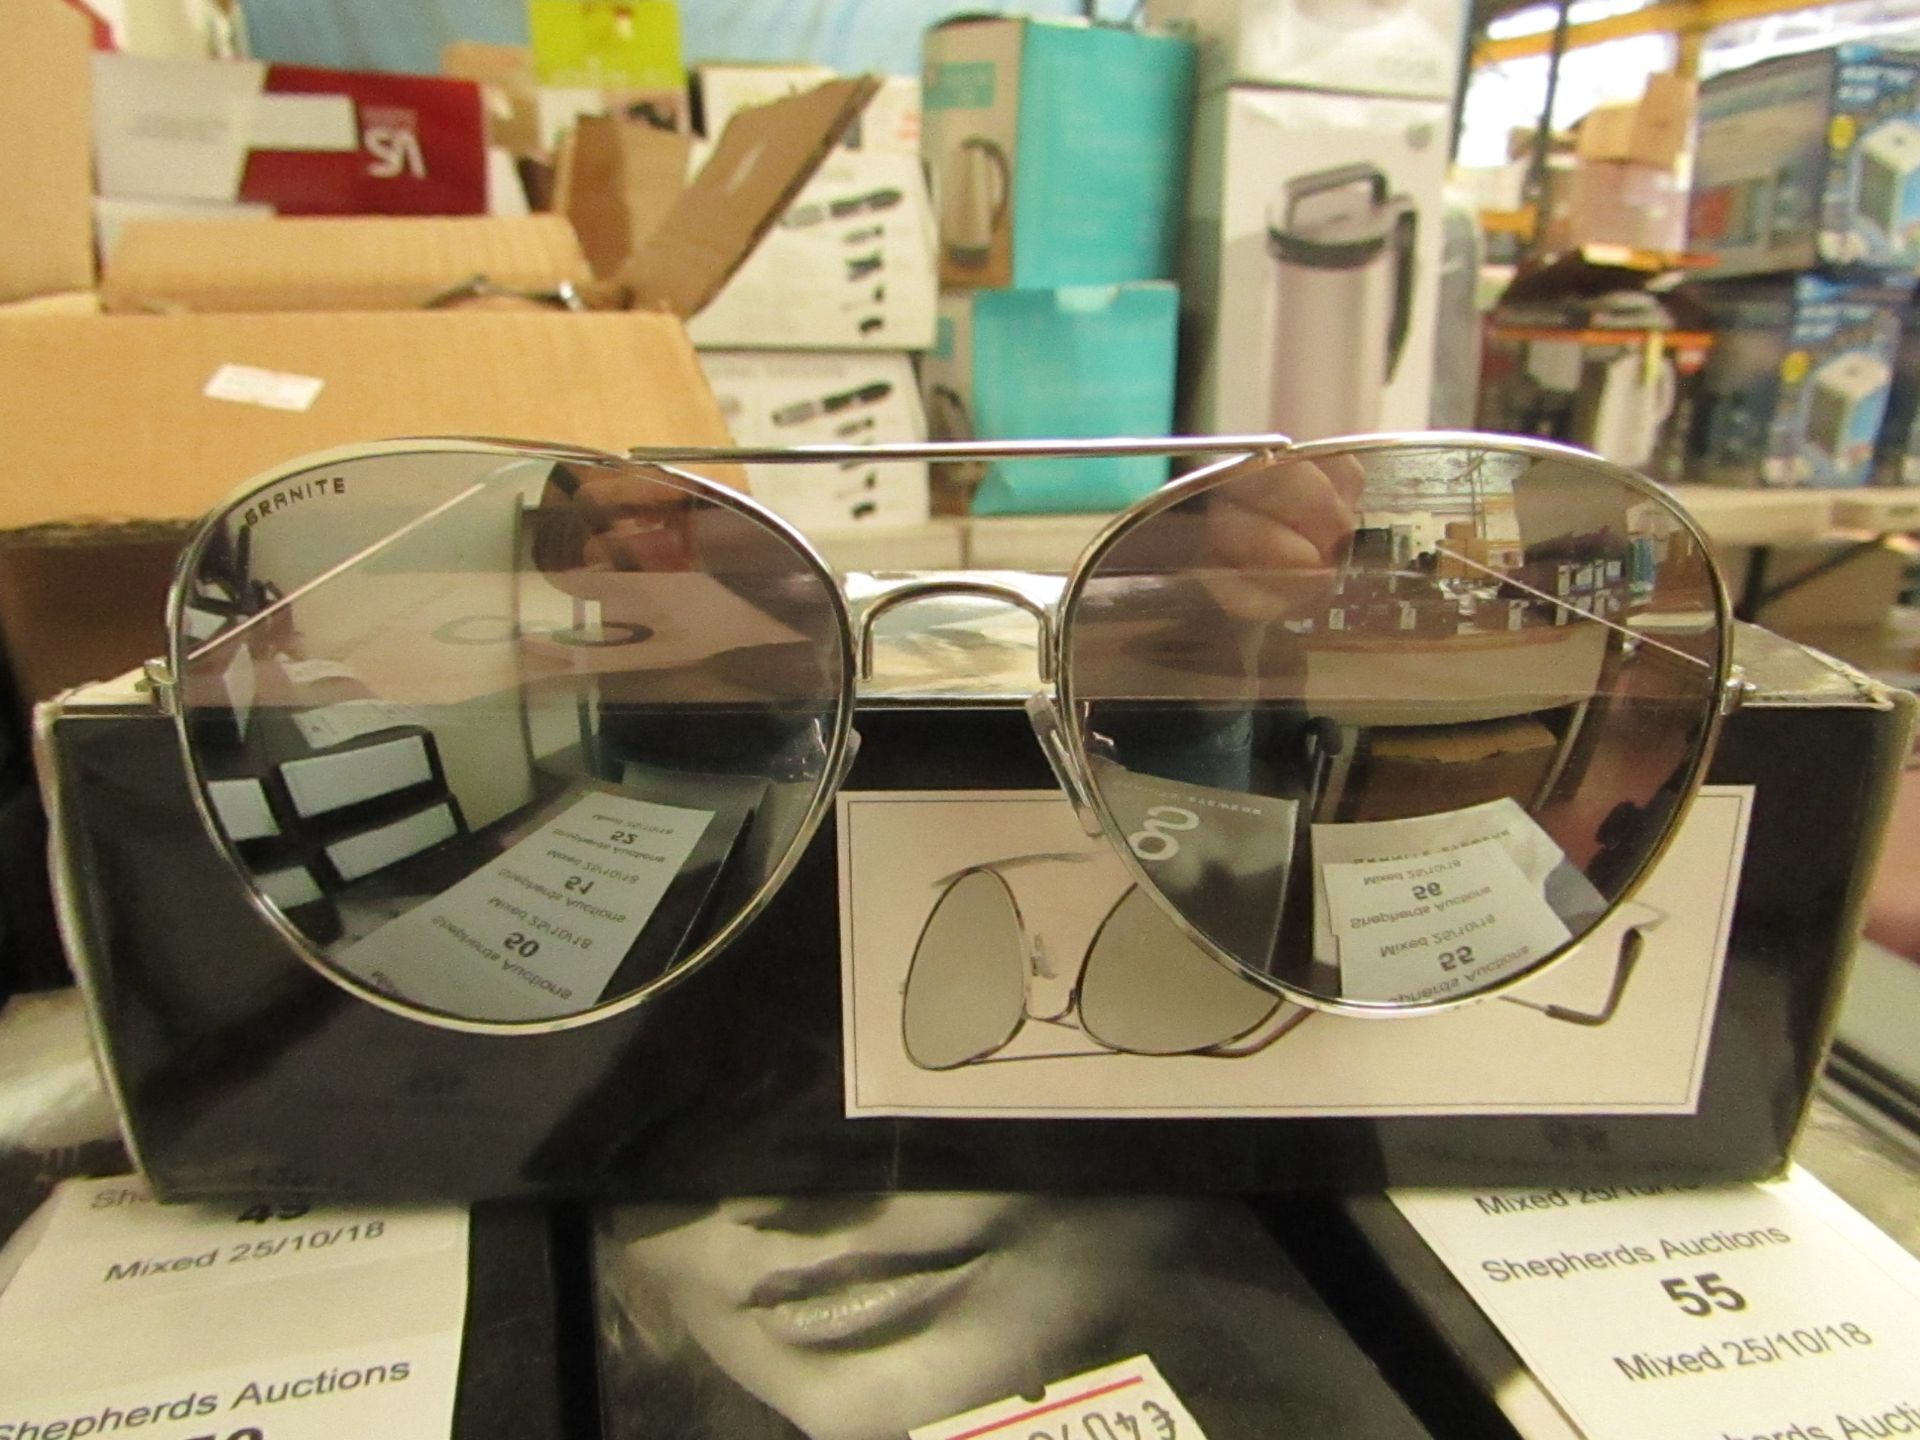 A Pair of Granite Aviator style sunglasses, new and boxed.